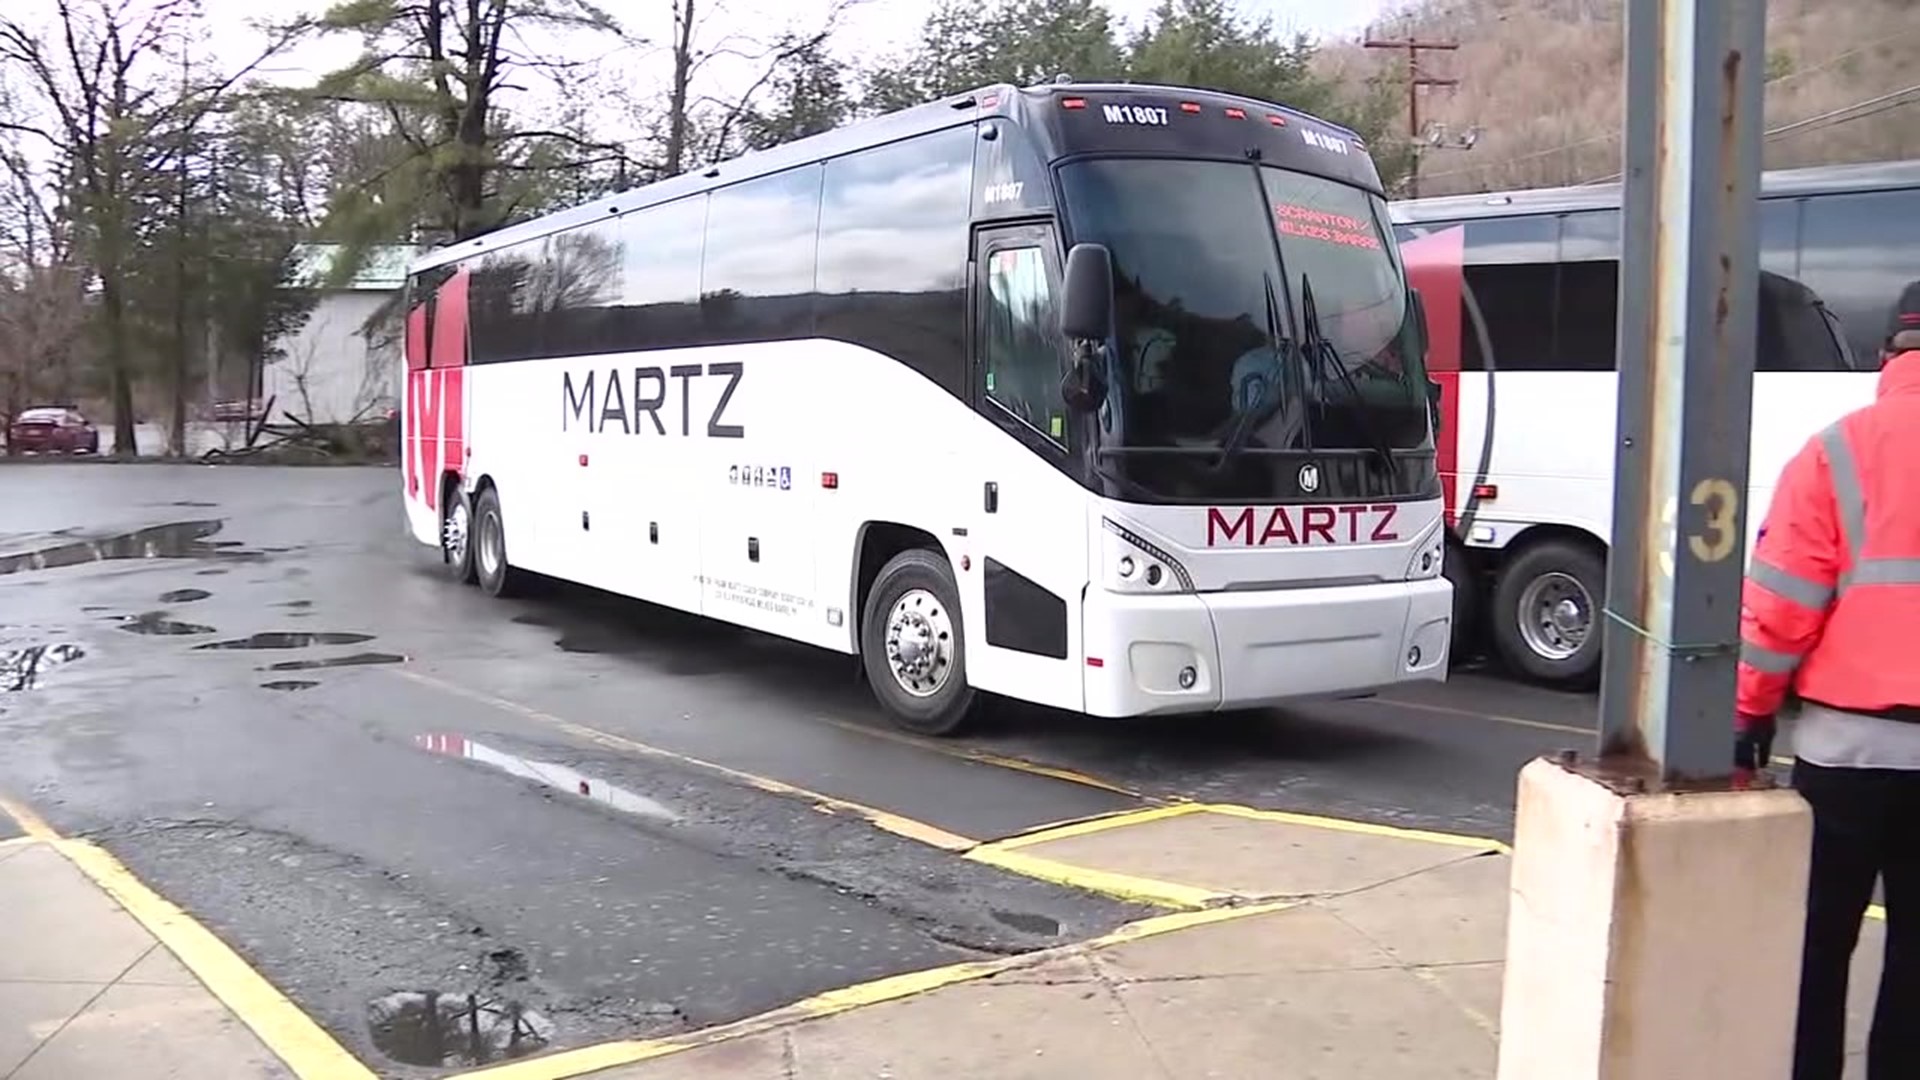 Martz Bus Company voluntarily halted services last month due to COVID-19. Employees received an email with safety protocols and plans to reopen next month.